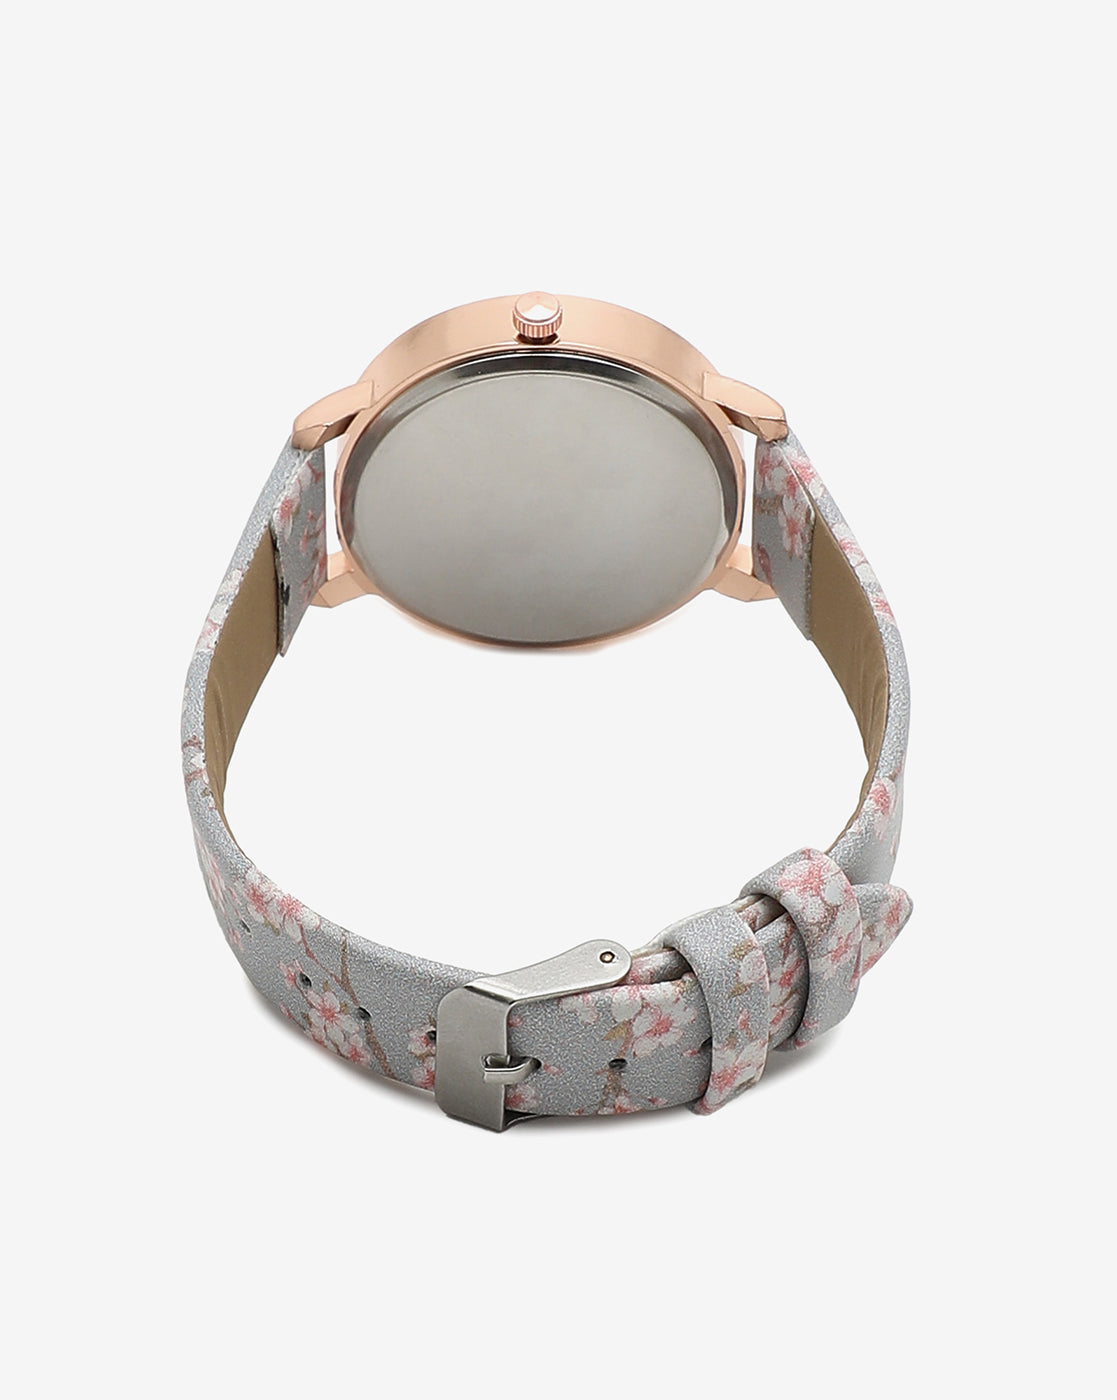 Grey & Champagne Gold Decorative Analog Round Dial With Floral Printed Leather Strap